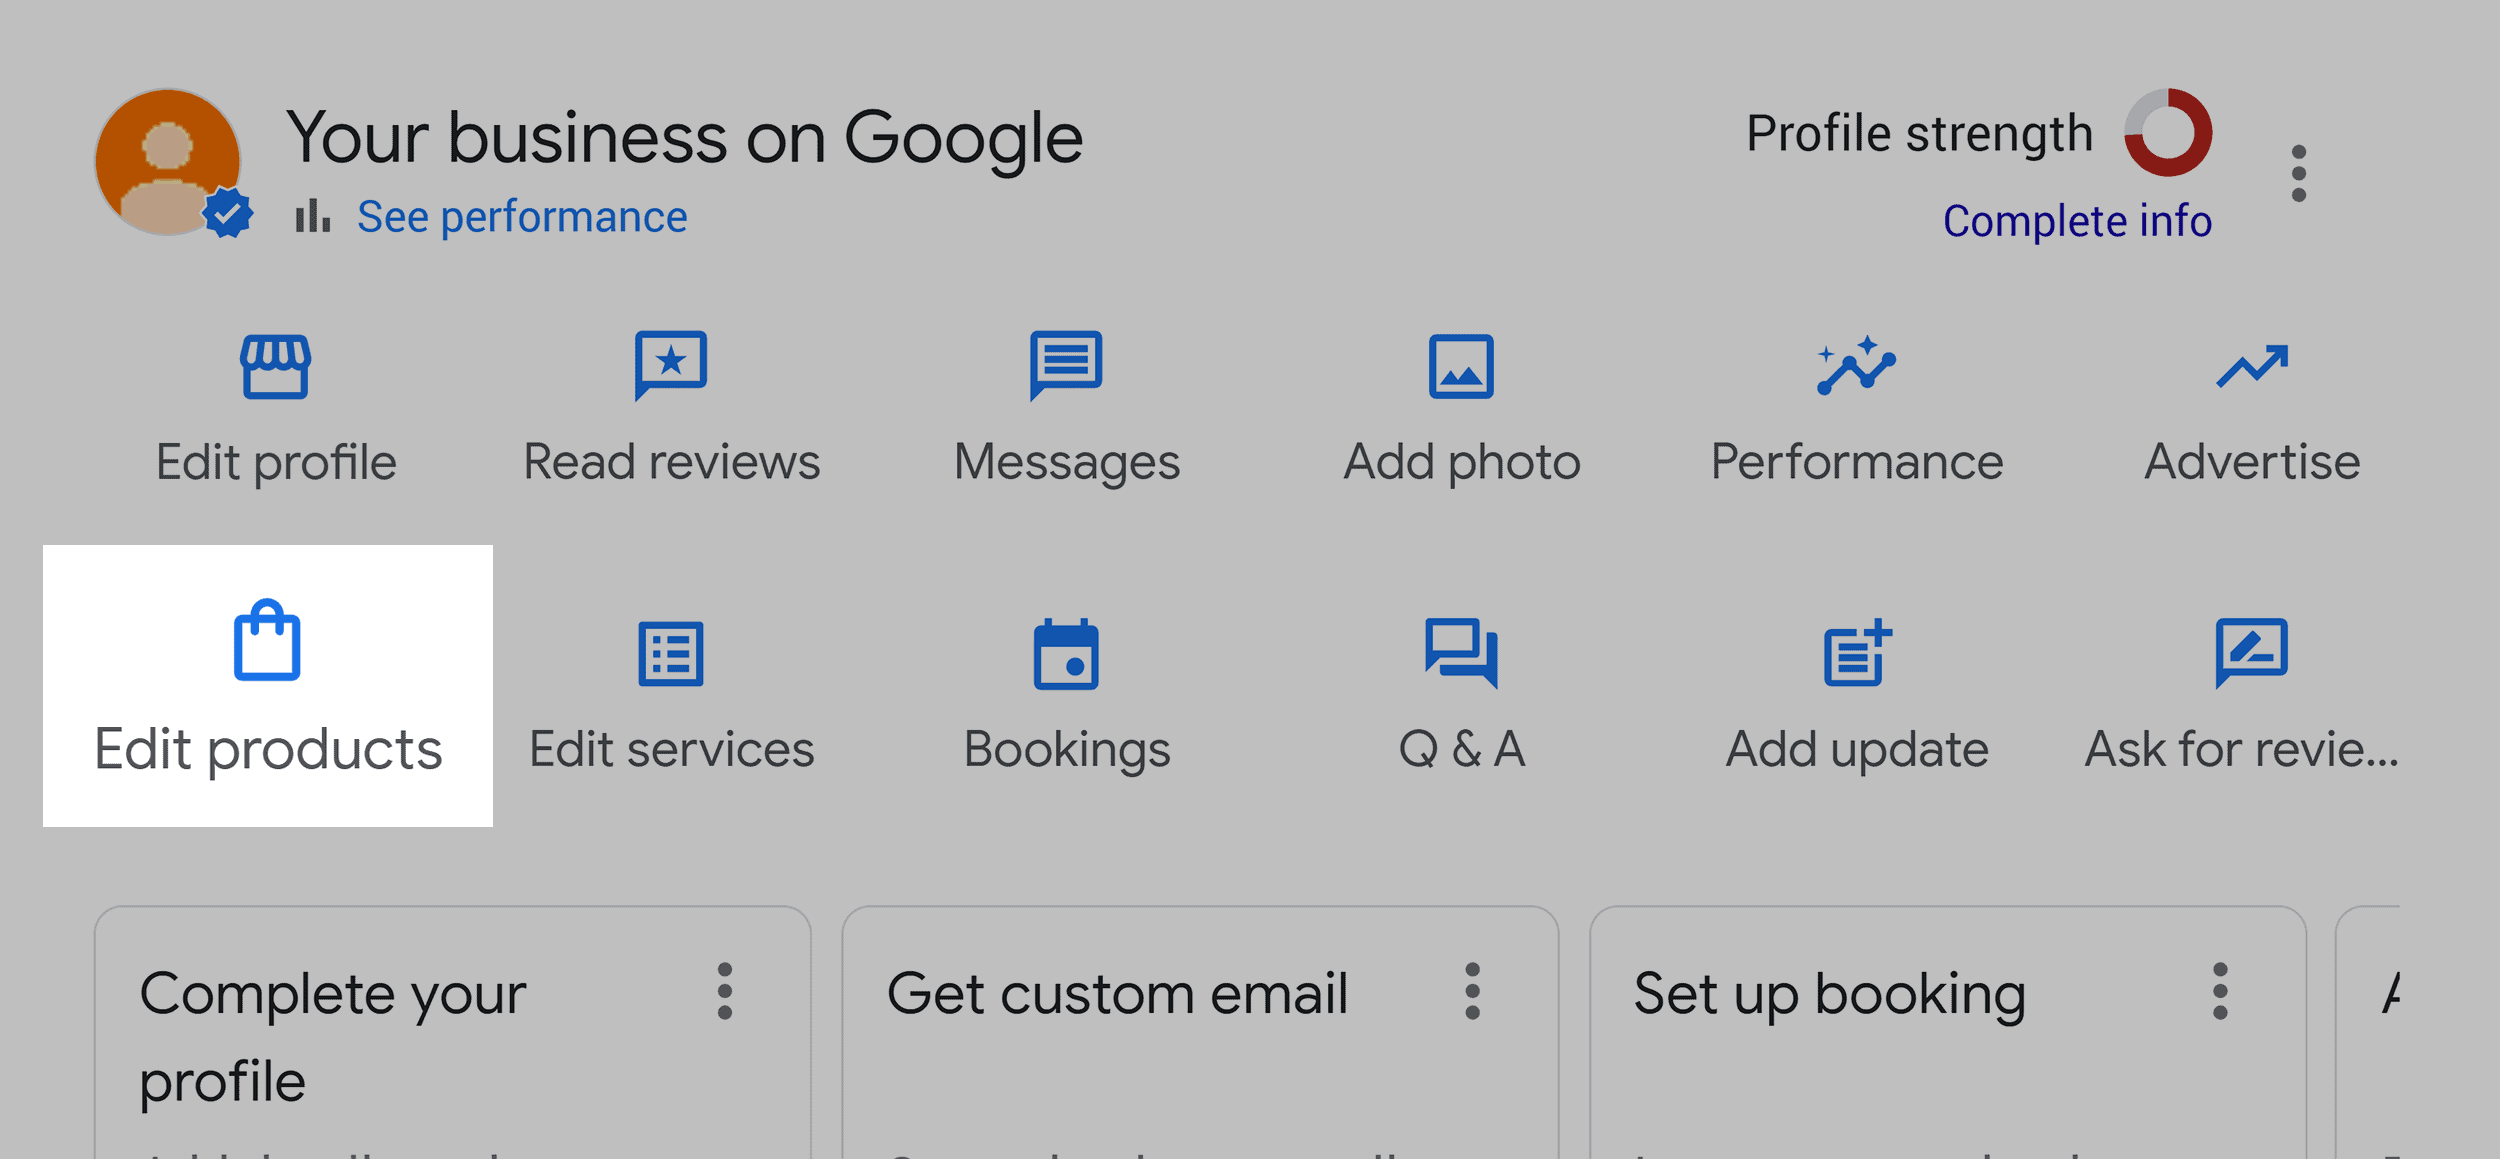 Google Business – Edit products